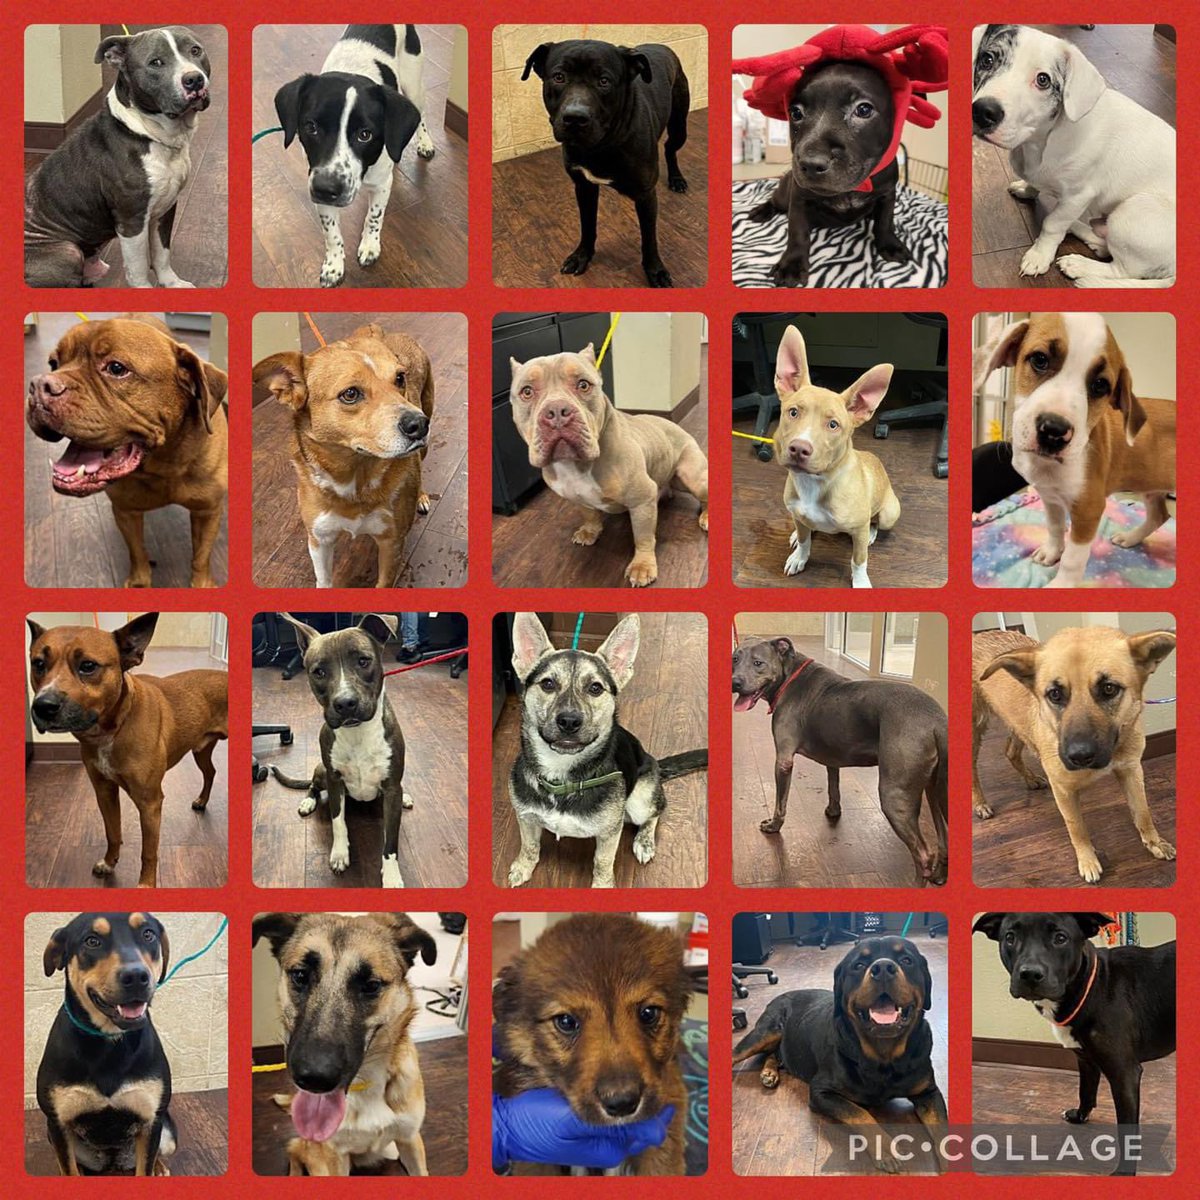 ‼️SHELTER DOGS ARE ALMOST FULL‼️#Greenville #Texas Only 2 kennels are open Can’t adopt? Considering fostering a dog while a reputable rescue works to find these dogs GOOD homes. PLEASE go in or email animalcontrol@ci.greenville.tx.us MORE links below ⬇️ #dogsoftwitter